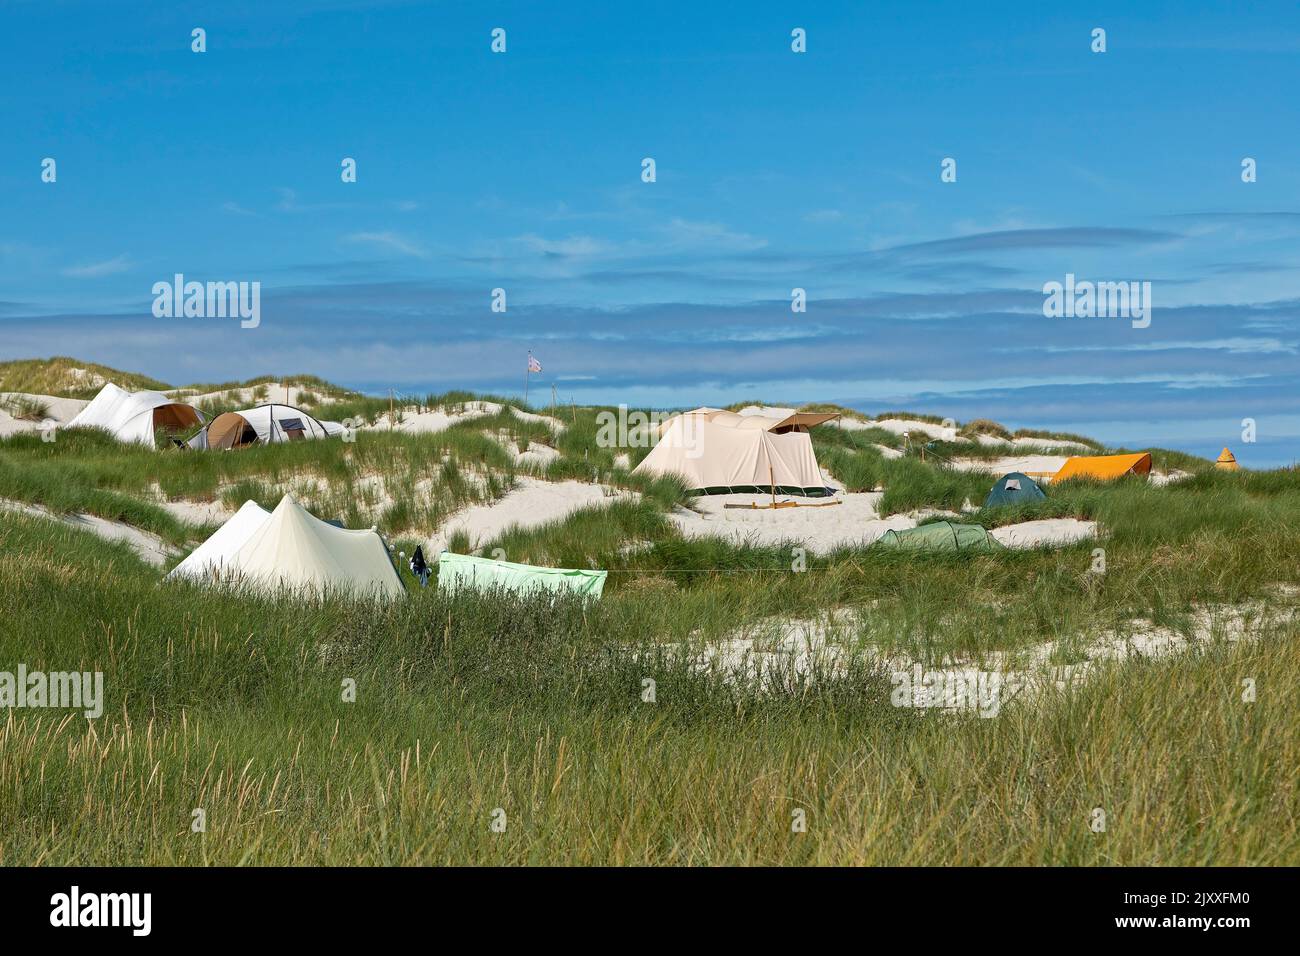 Camping site in the dunes, Amrum Island, North Friesland, Schleswig-Holstein, Germany Stock Photo